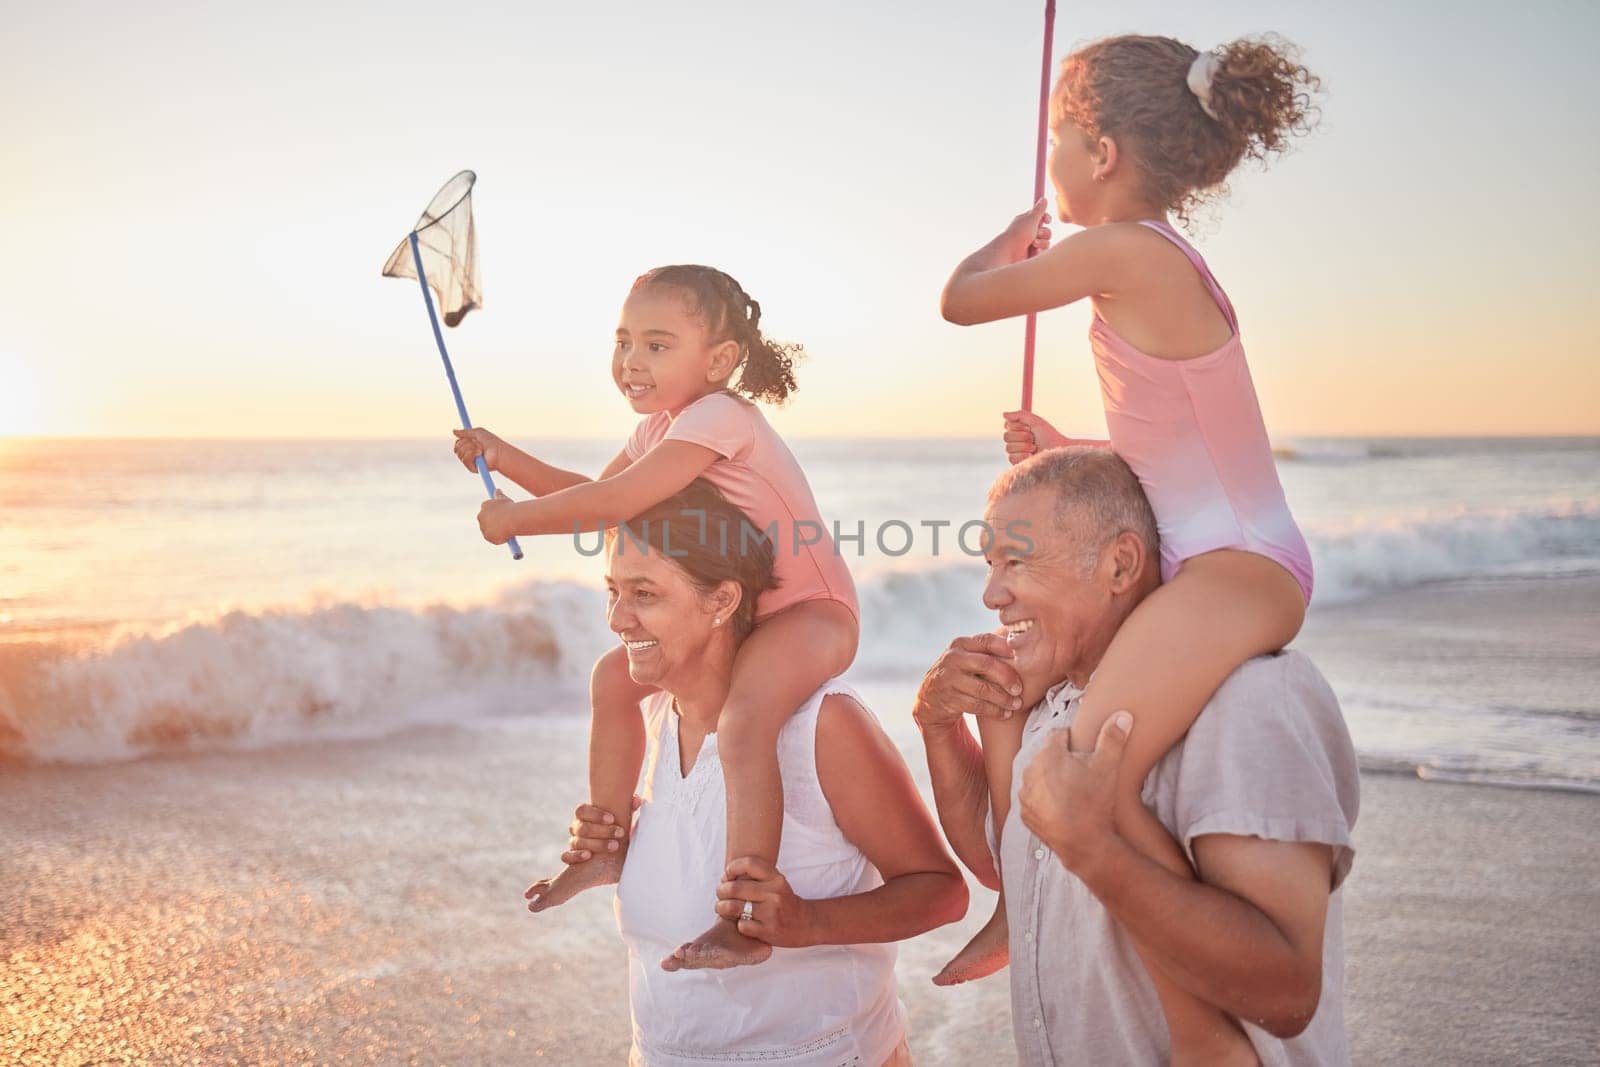 Children, grandparents and piggy back on beach on summer holiday walking in sea sand. Happy family at the ocean on vacation in Mexico. Grandma, grandpa and kids in on a walk in waves at sunset